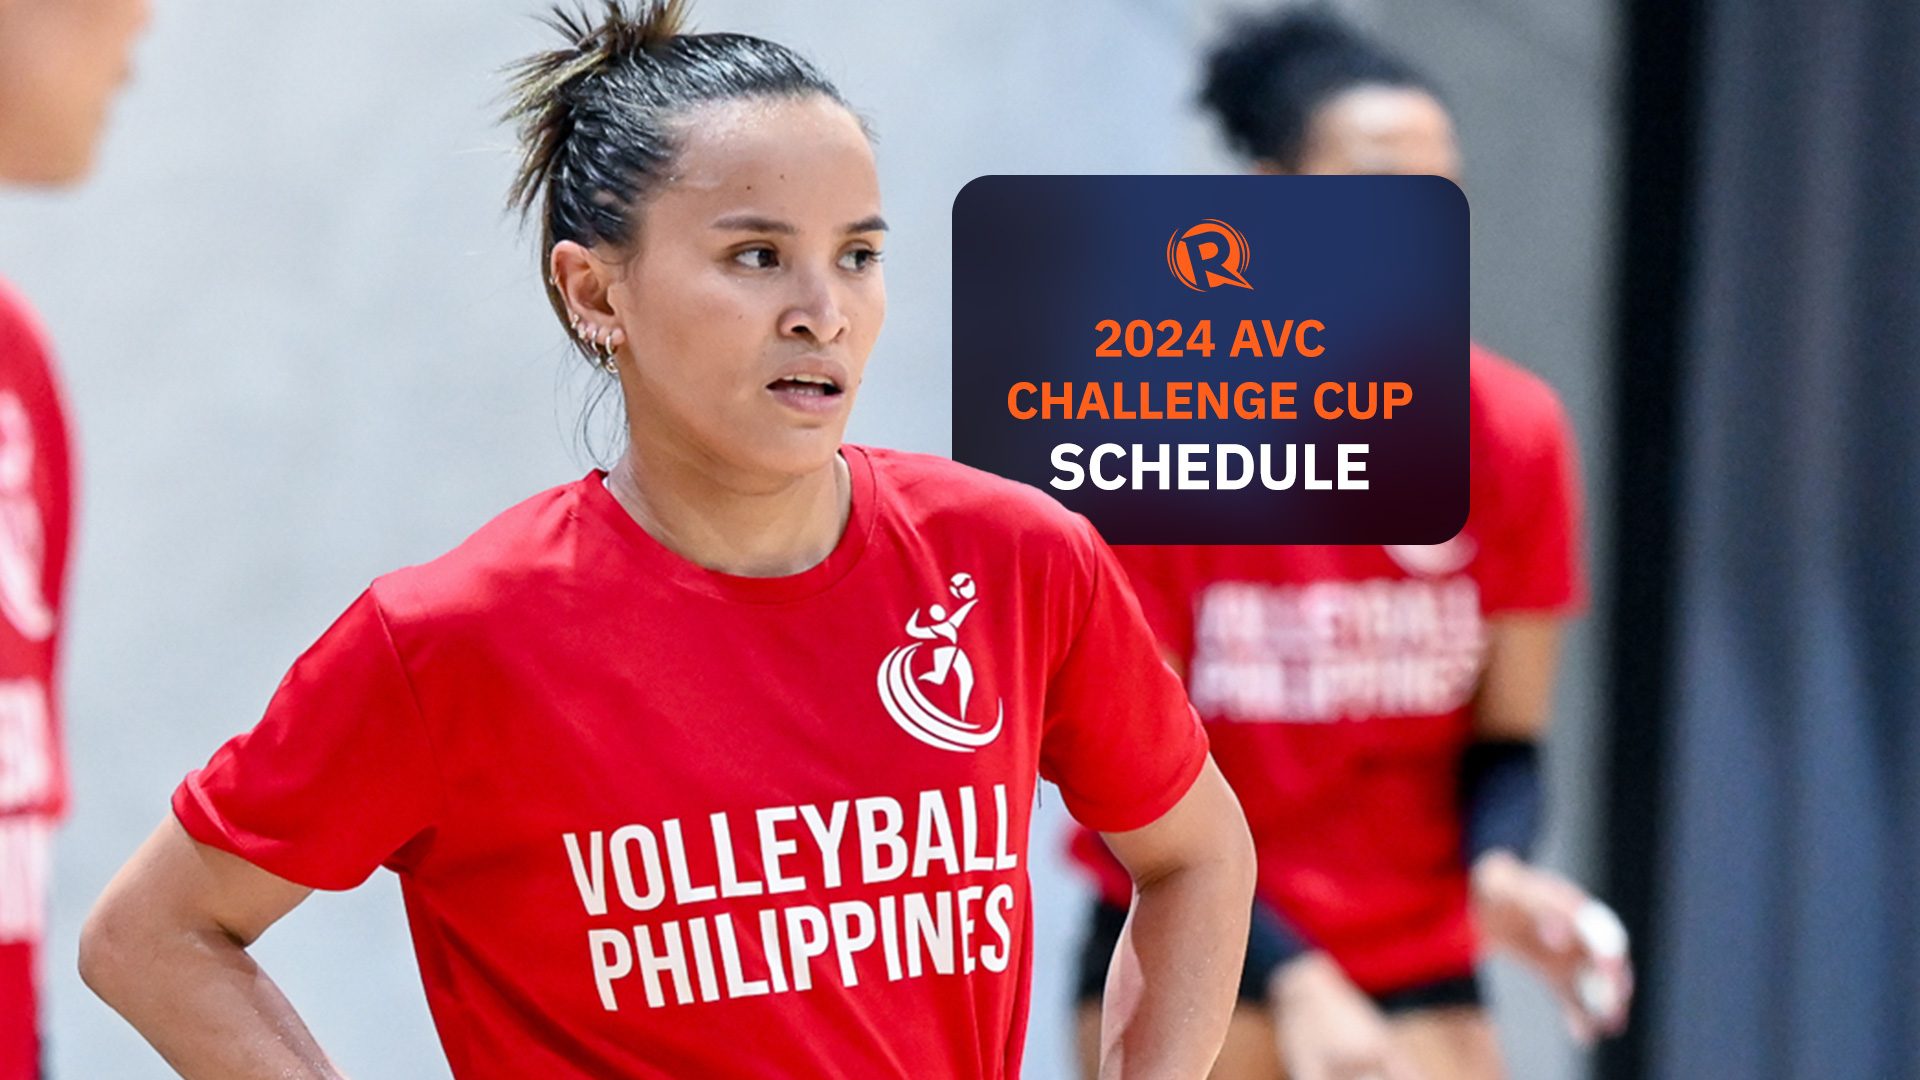 Ever ready: PVL rising star Gandler humbly accepts bench gig, delivers as Laure rests